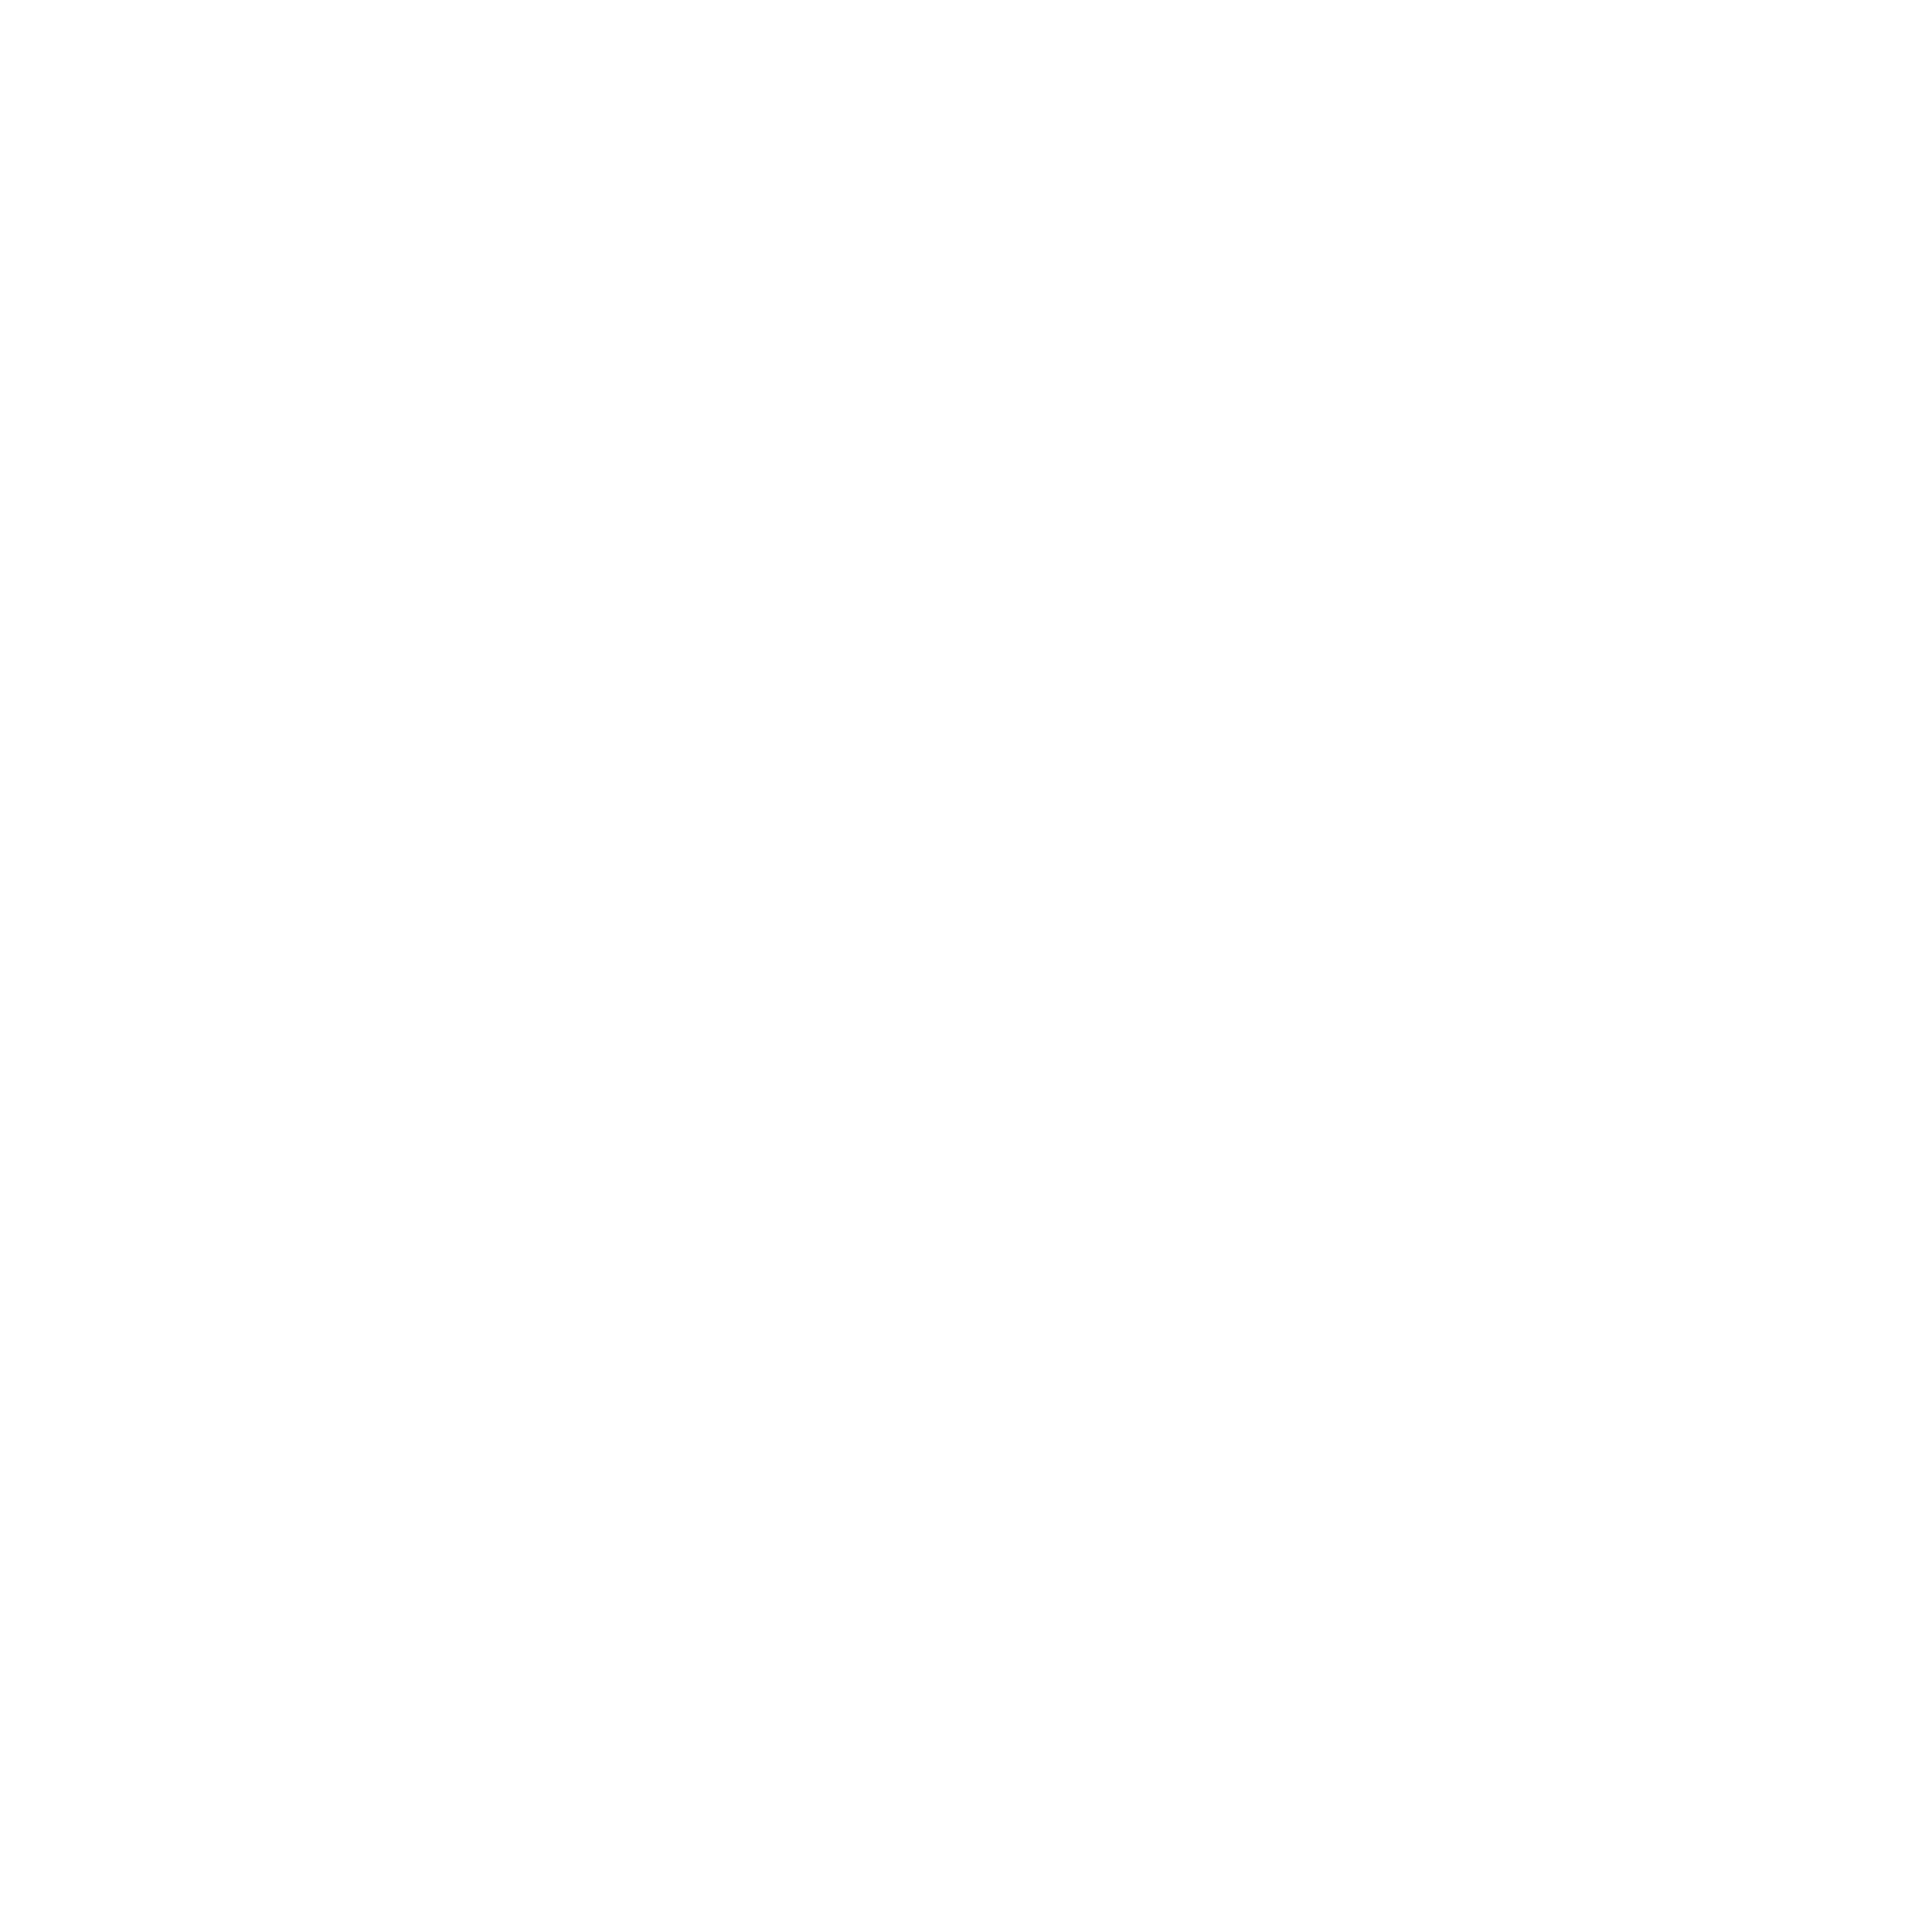 BAV Science and Industry Group